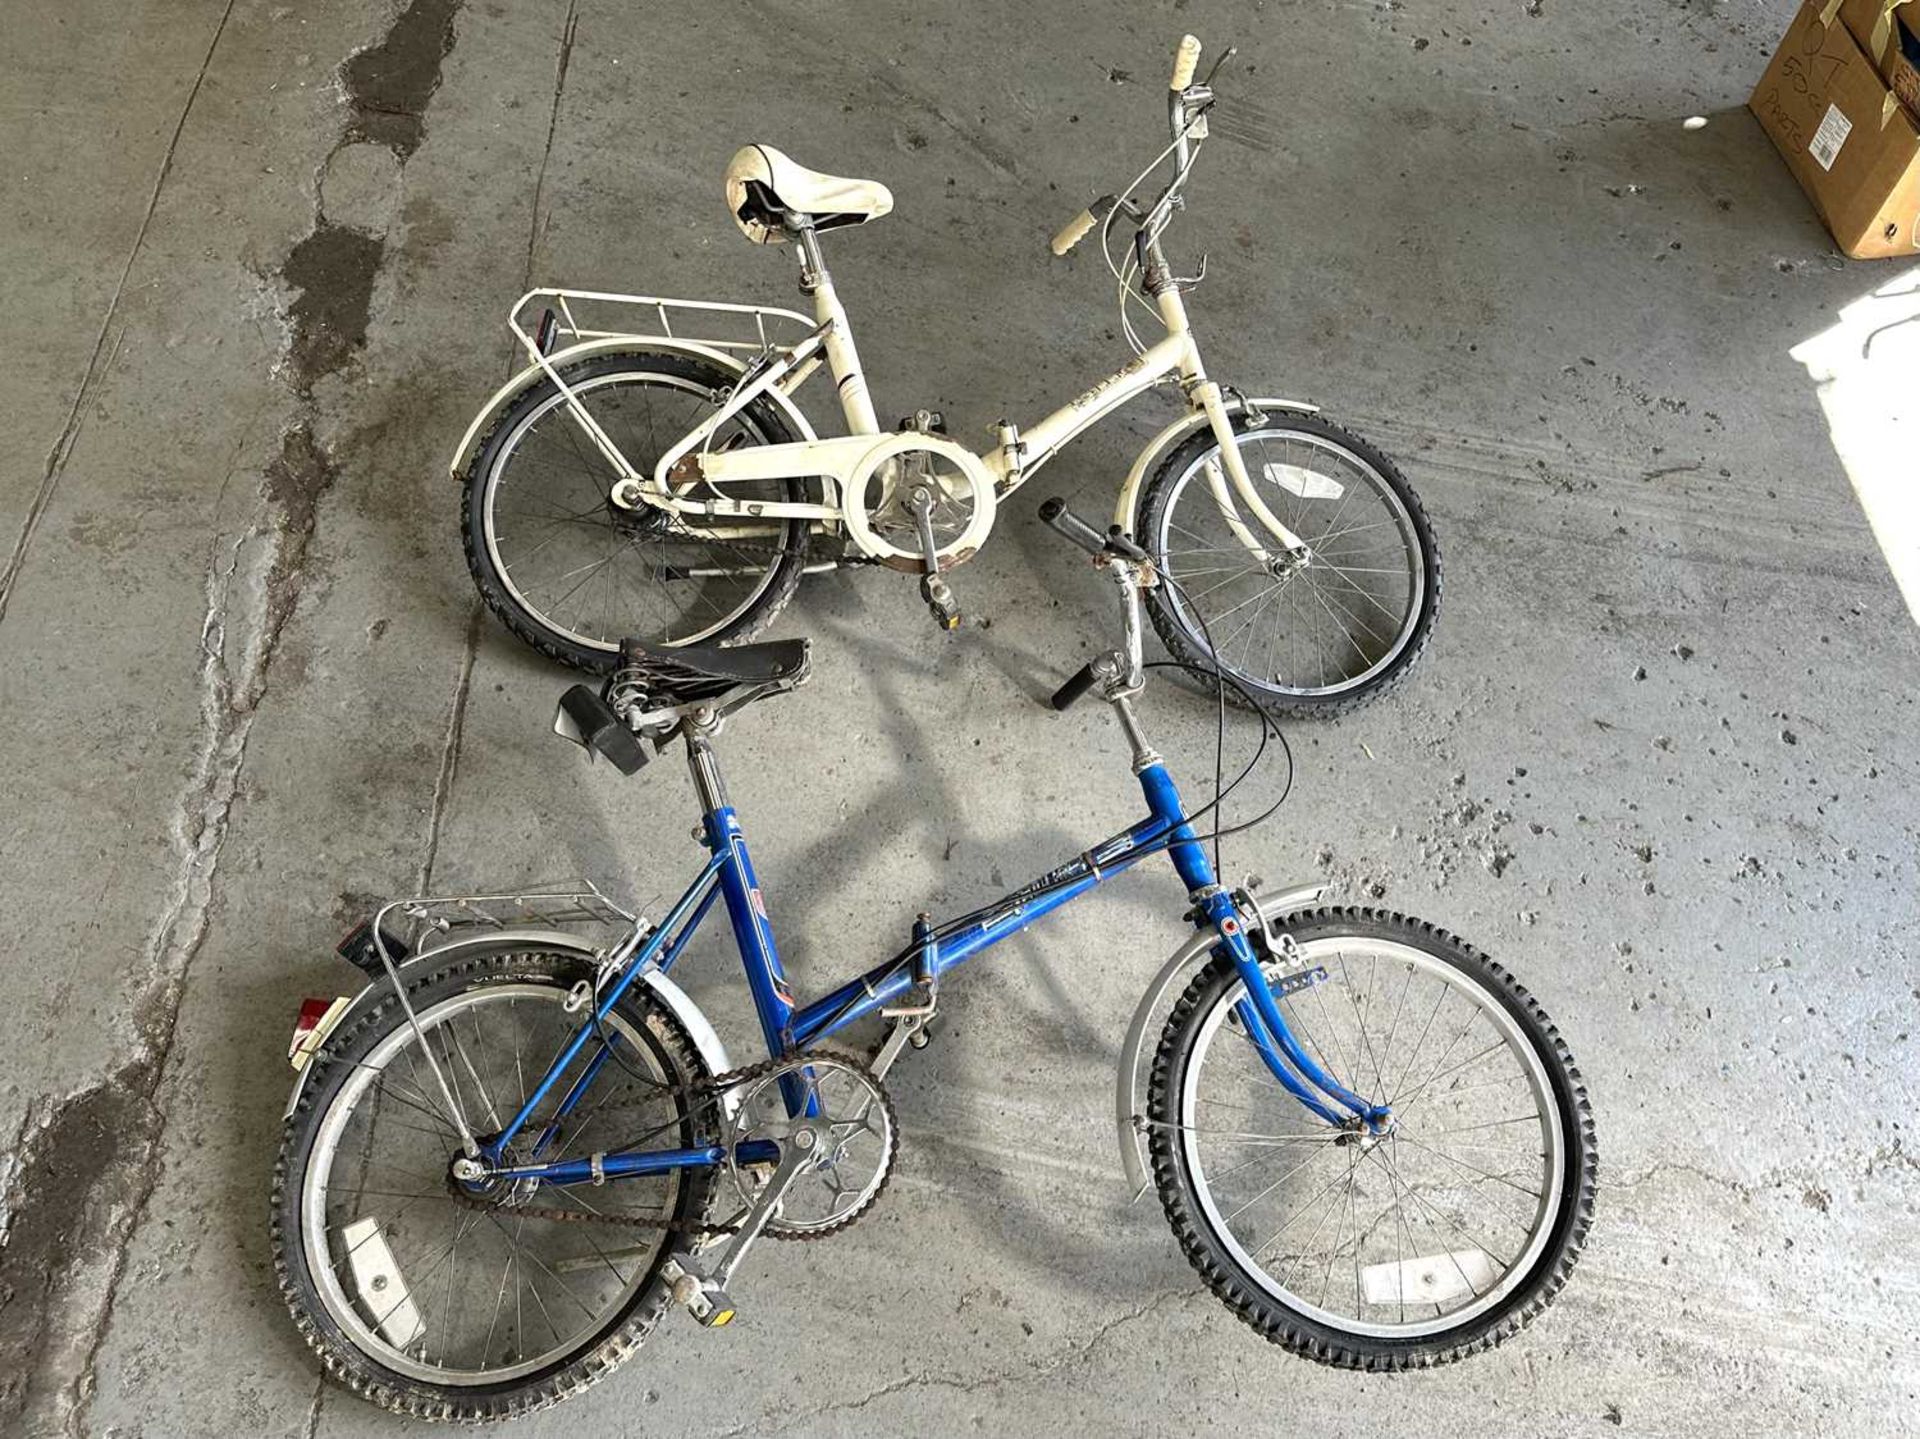 Pair of folding bicycles - NO RESERVE